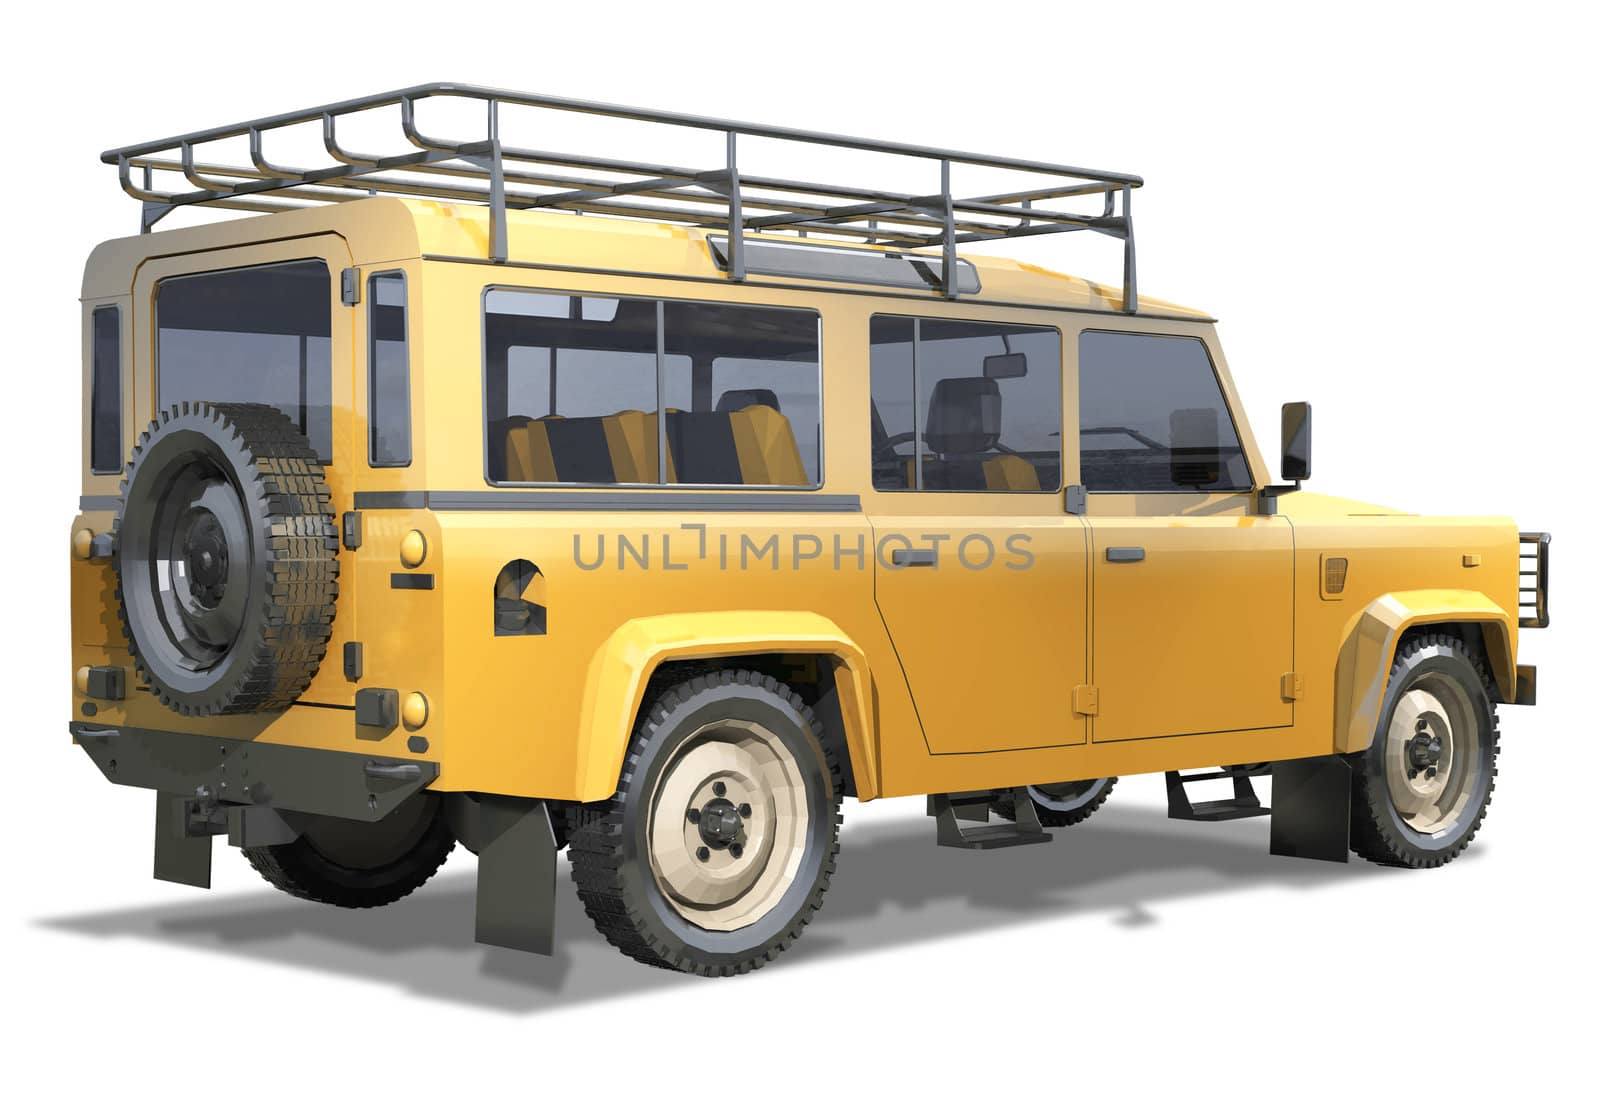 Wheel drive off-road vehicle on a white background. Isolation, render. Ready to apply logo and inscriptions.